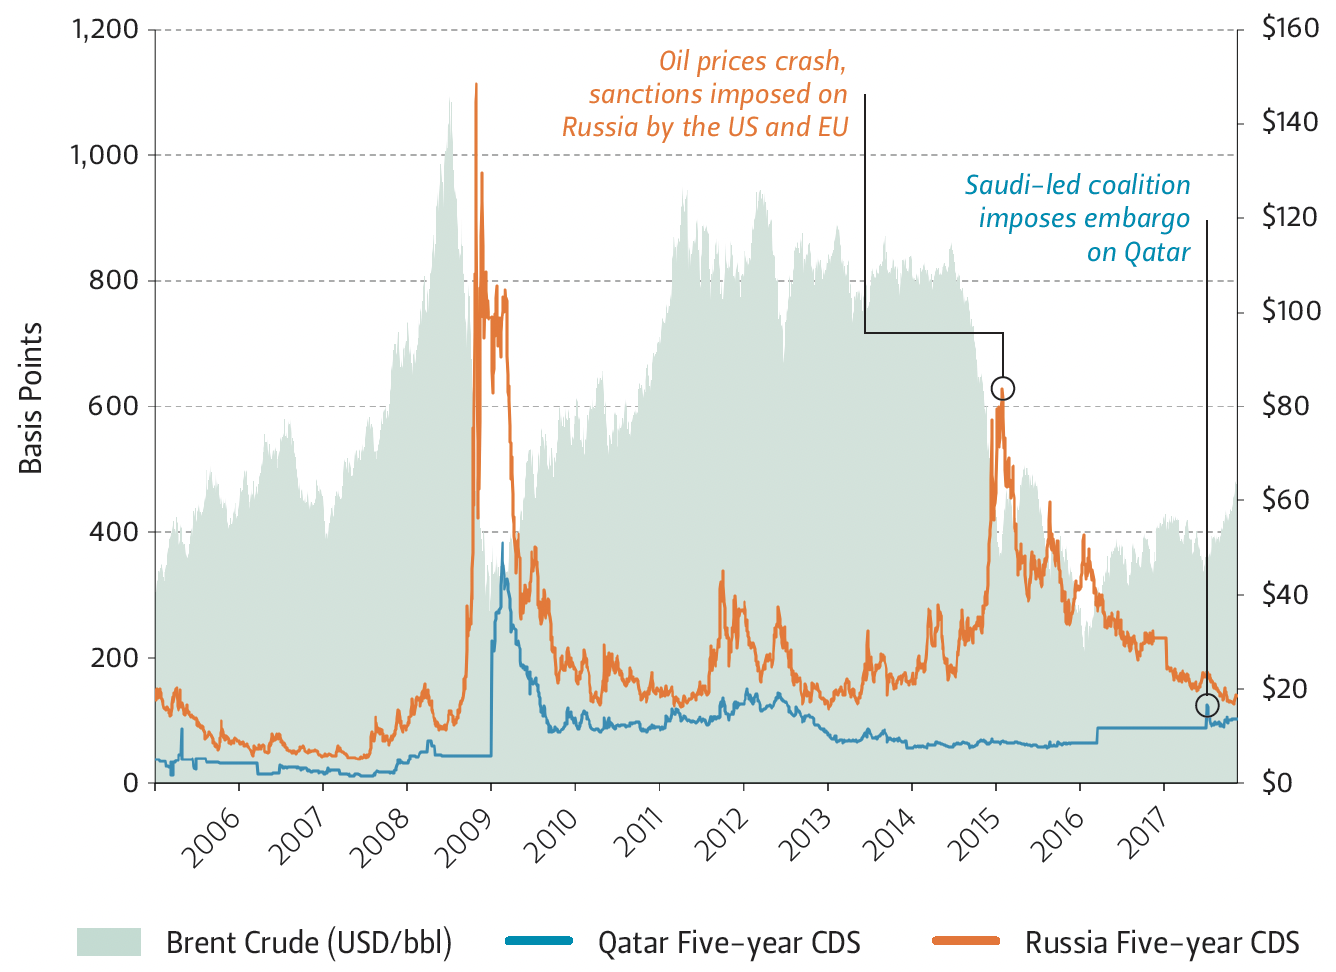 This graph compares Brent Crude, Qatar Five-Year CDS, and Russia Five-Year CDS.